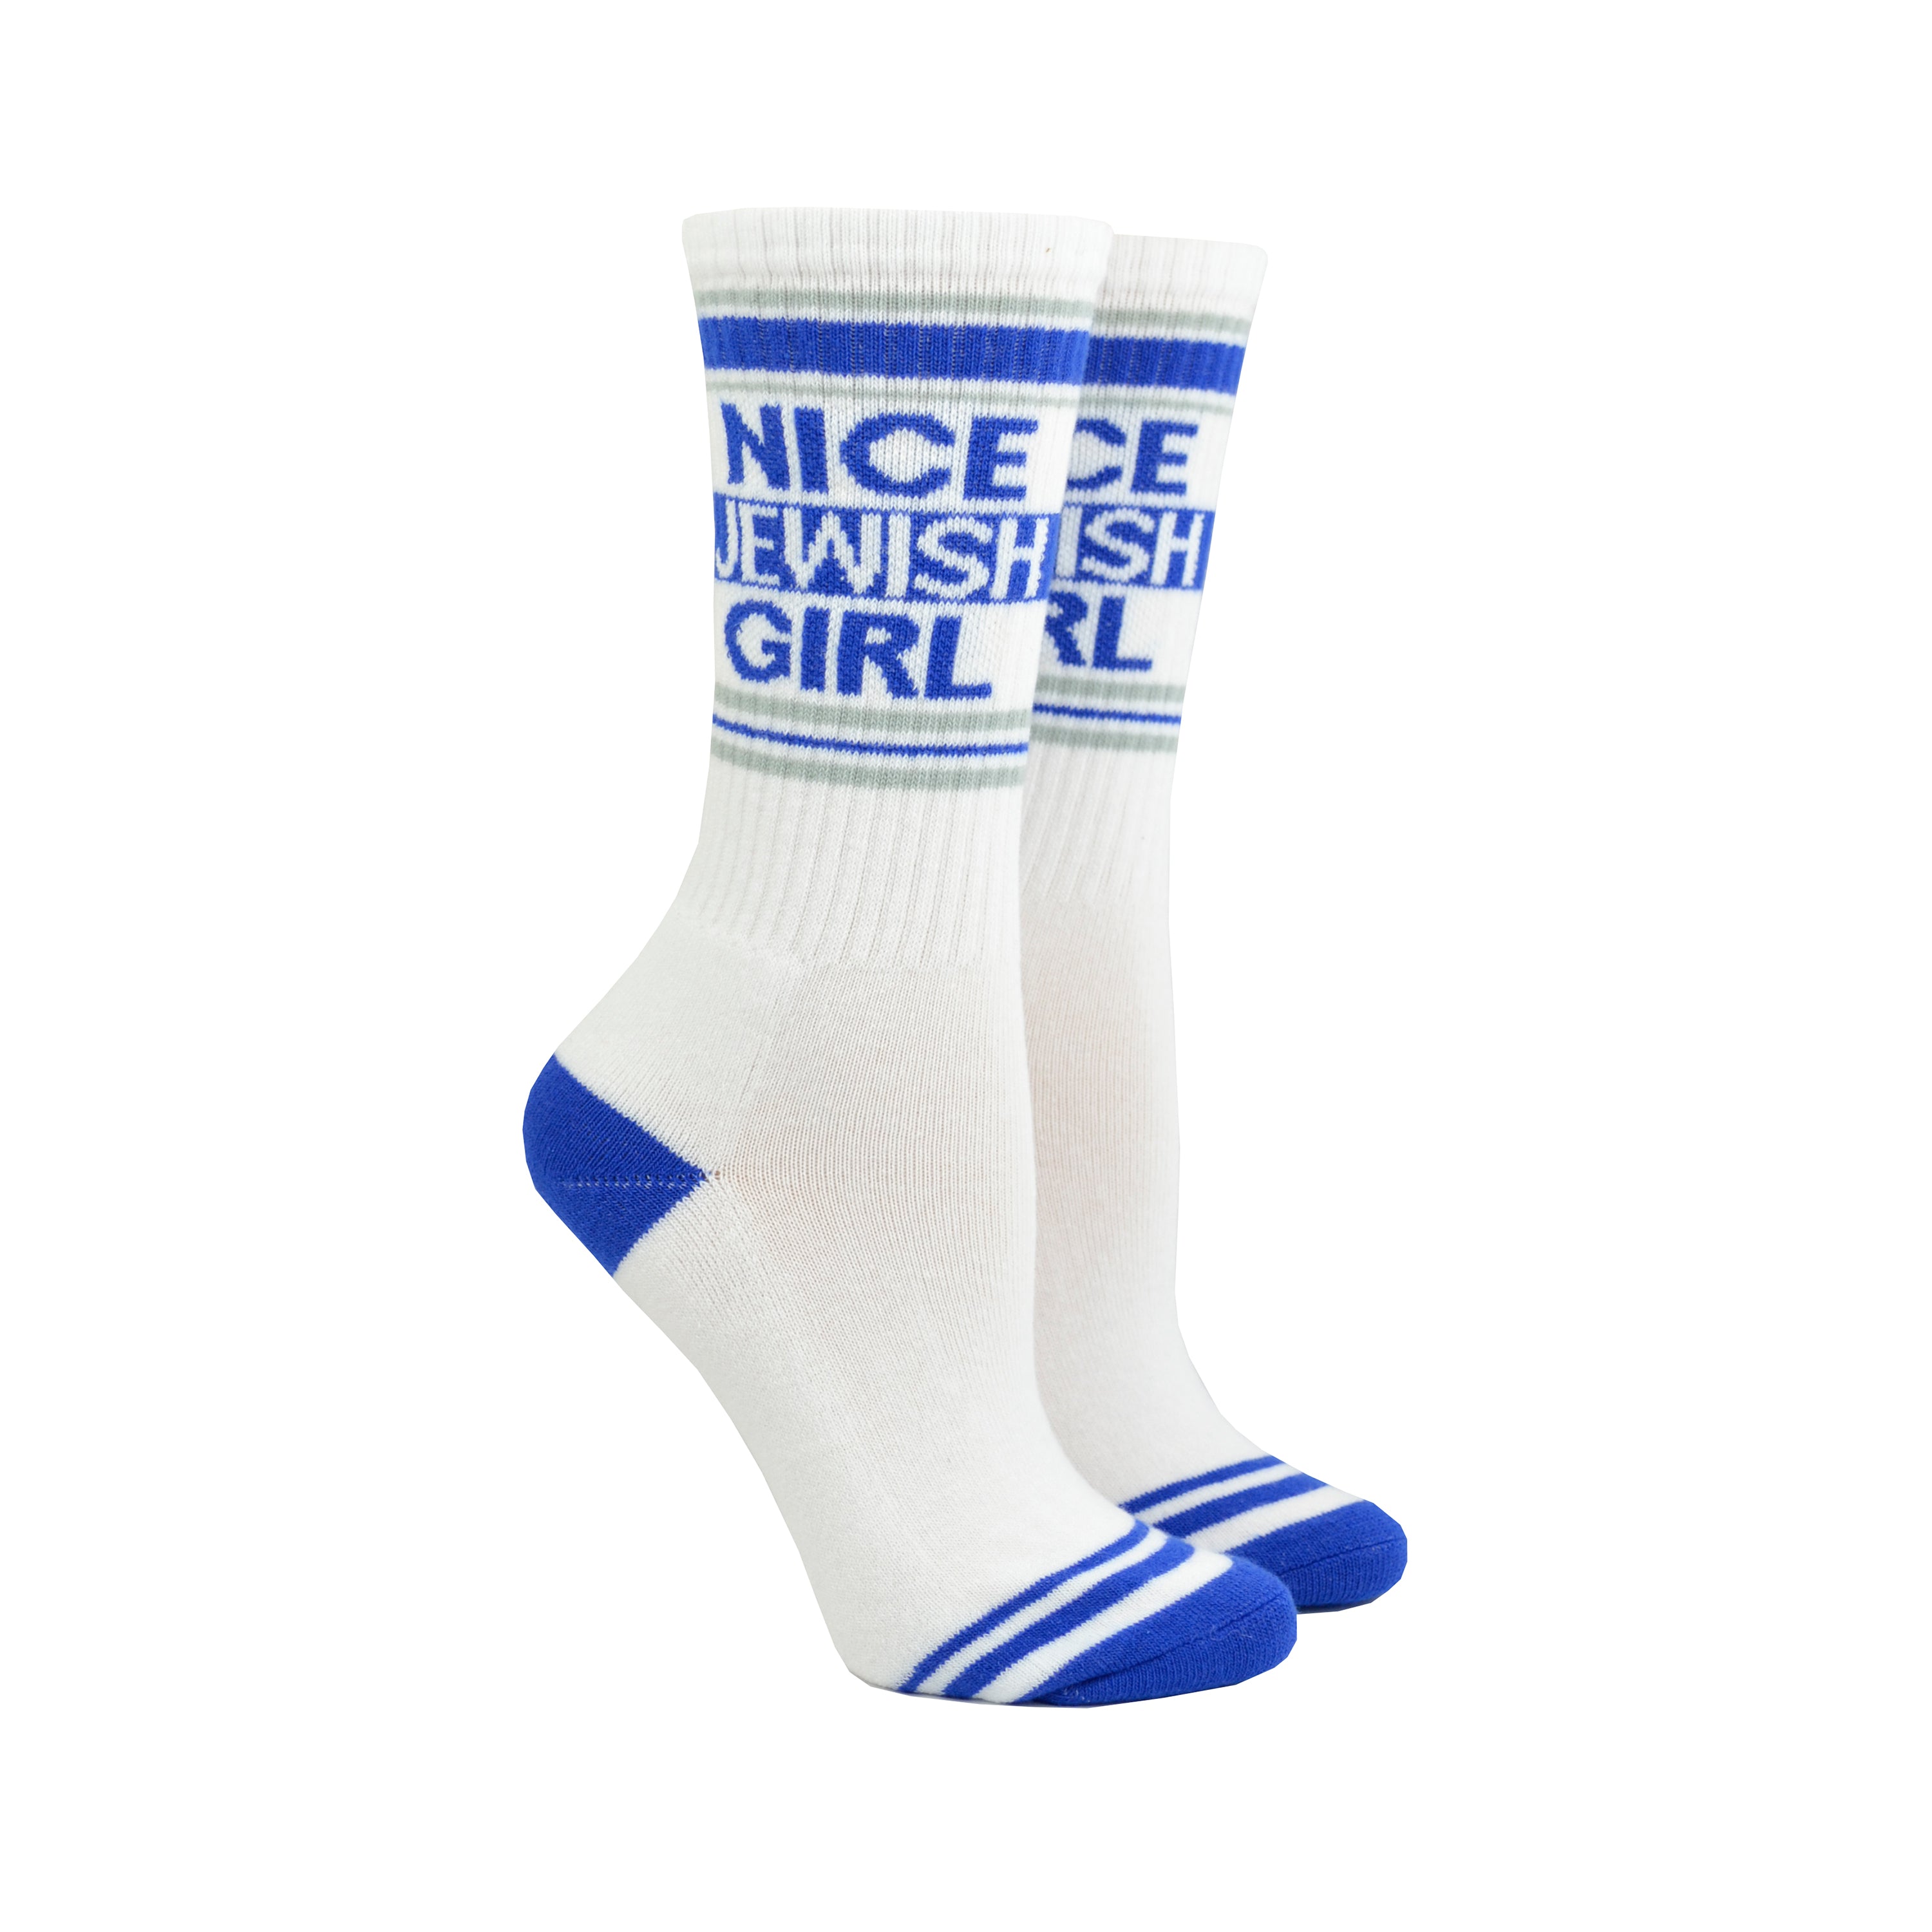 Shown on legforms, a pair of Gumball Poodle brand unisex cotton crew sock in white with a blue striped cuff/heel/toe and the words, 